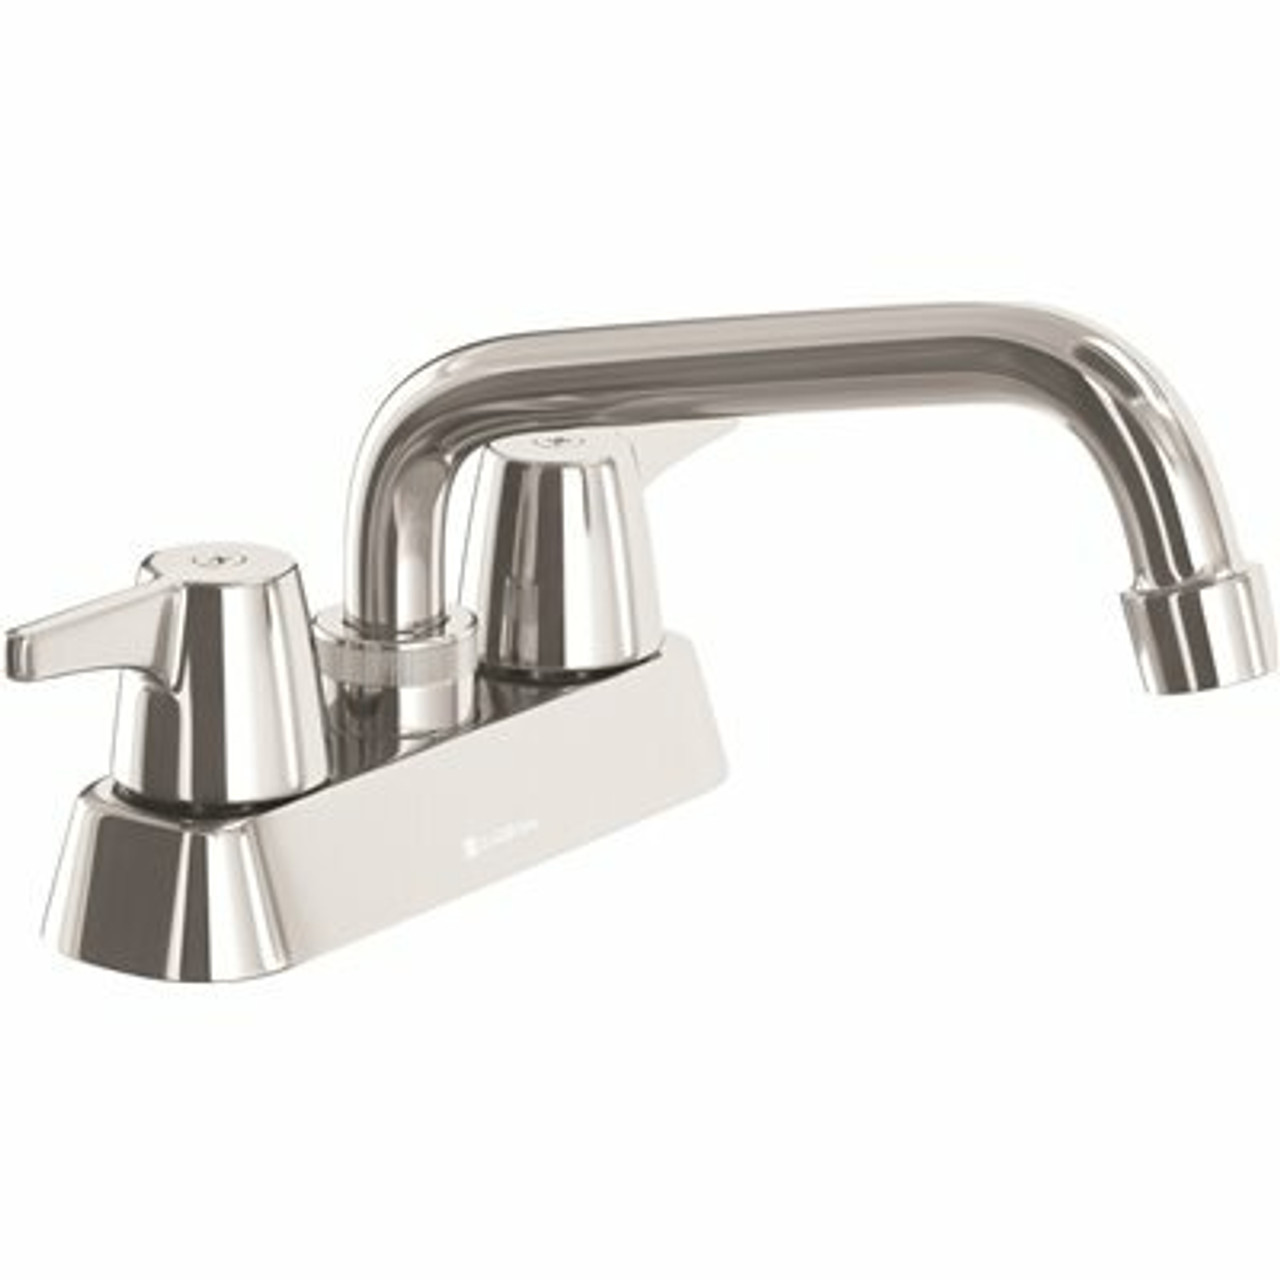 Premier 4 In. Centerset 2-Handle Laundry Faucet In Chrome